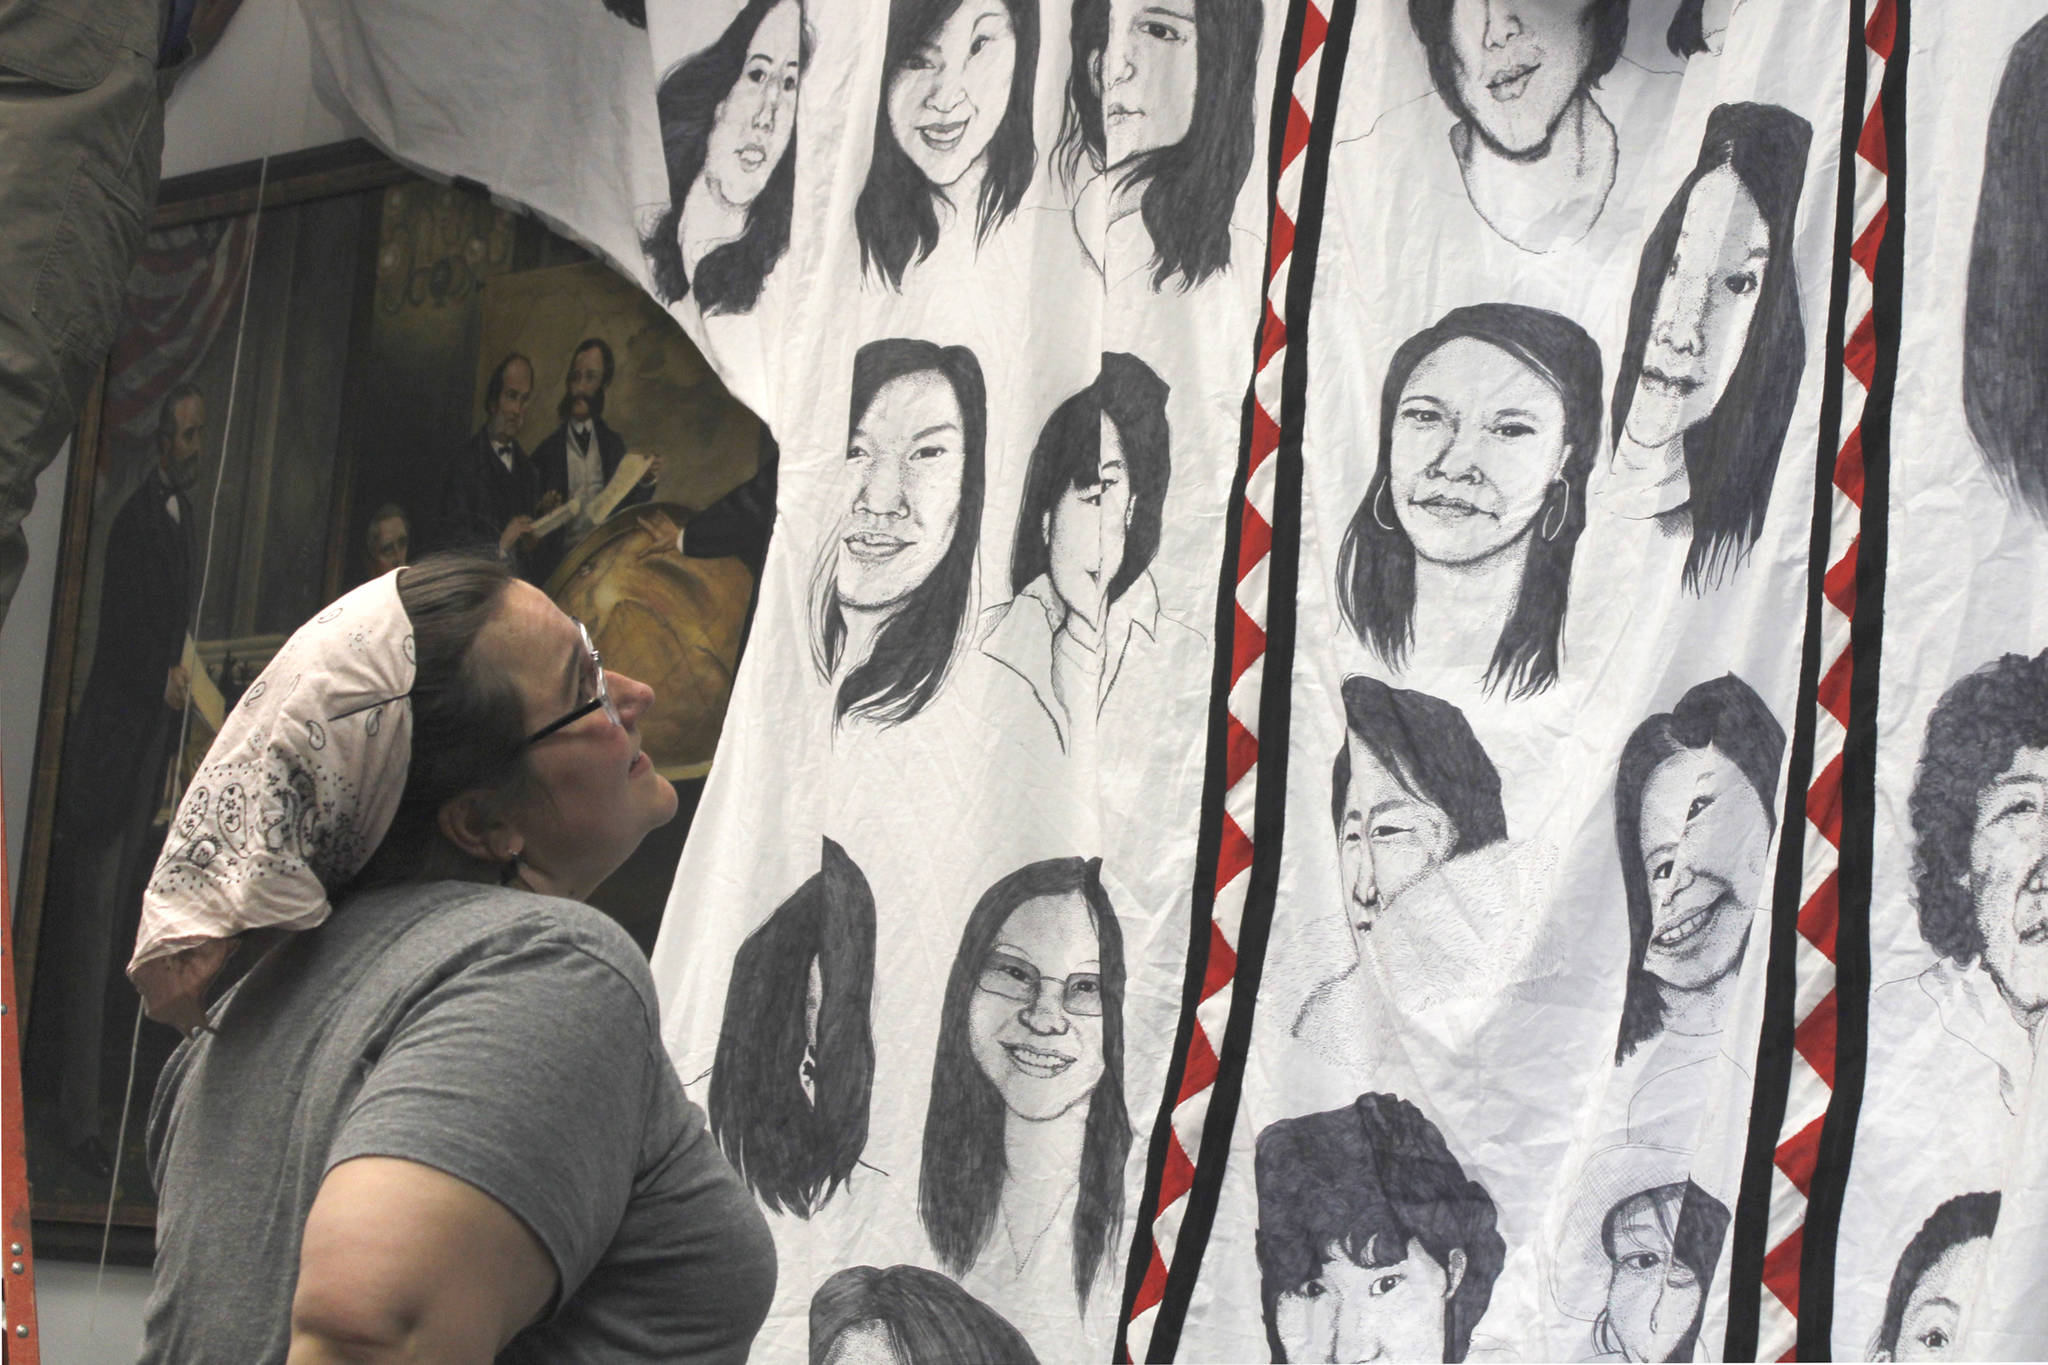 Yupik artist Amber Webb, of Dillingham, looks at her qaspeq that carries more than 90 portraits of missing and murdered indigenous women and girls at the Alaska State Capitol on Wednesday, May 1, 2019. (Alex McCarthy | Juneau Empire)